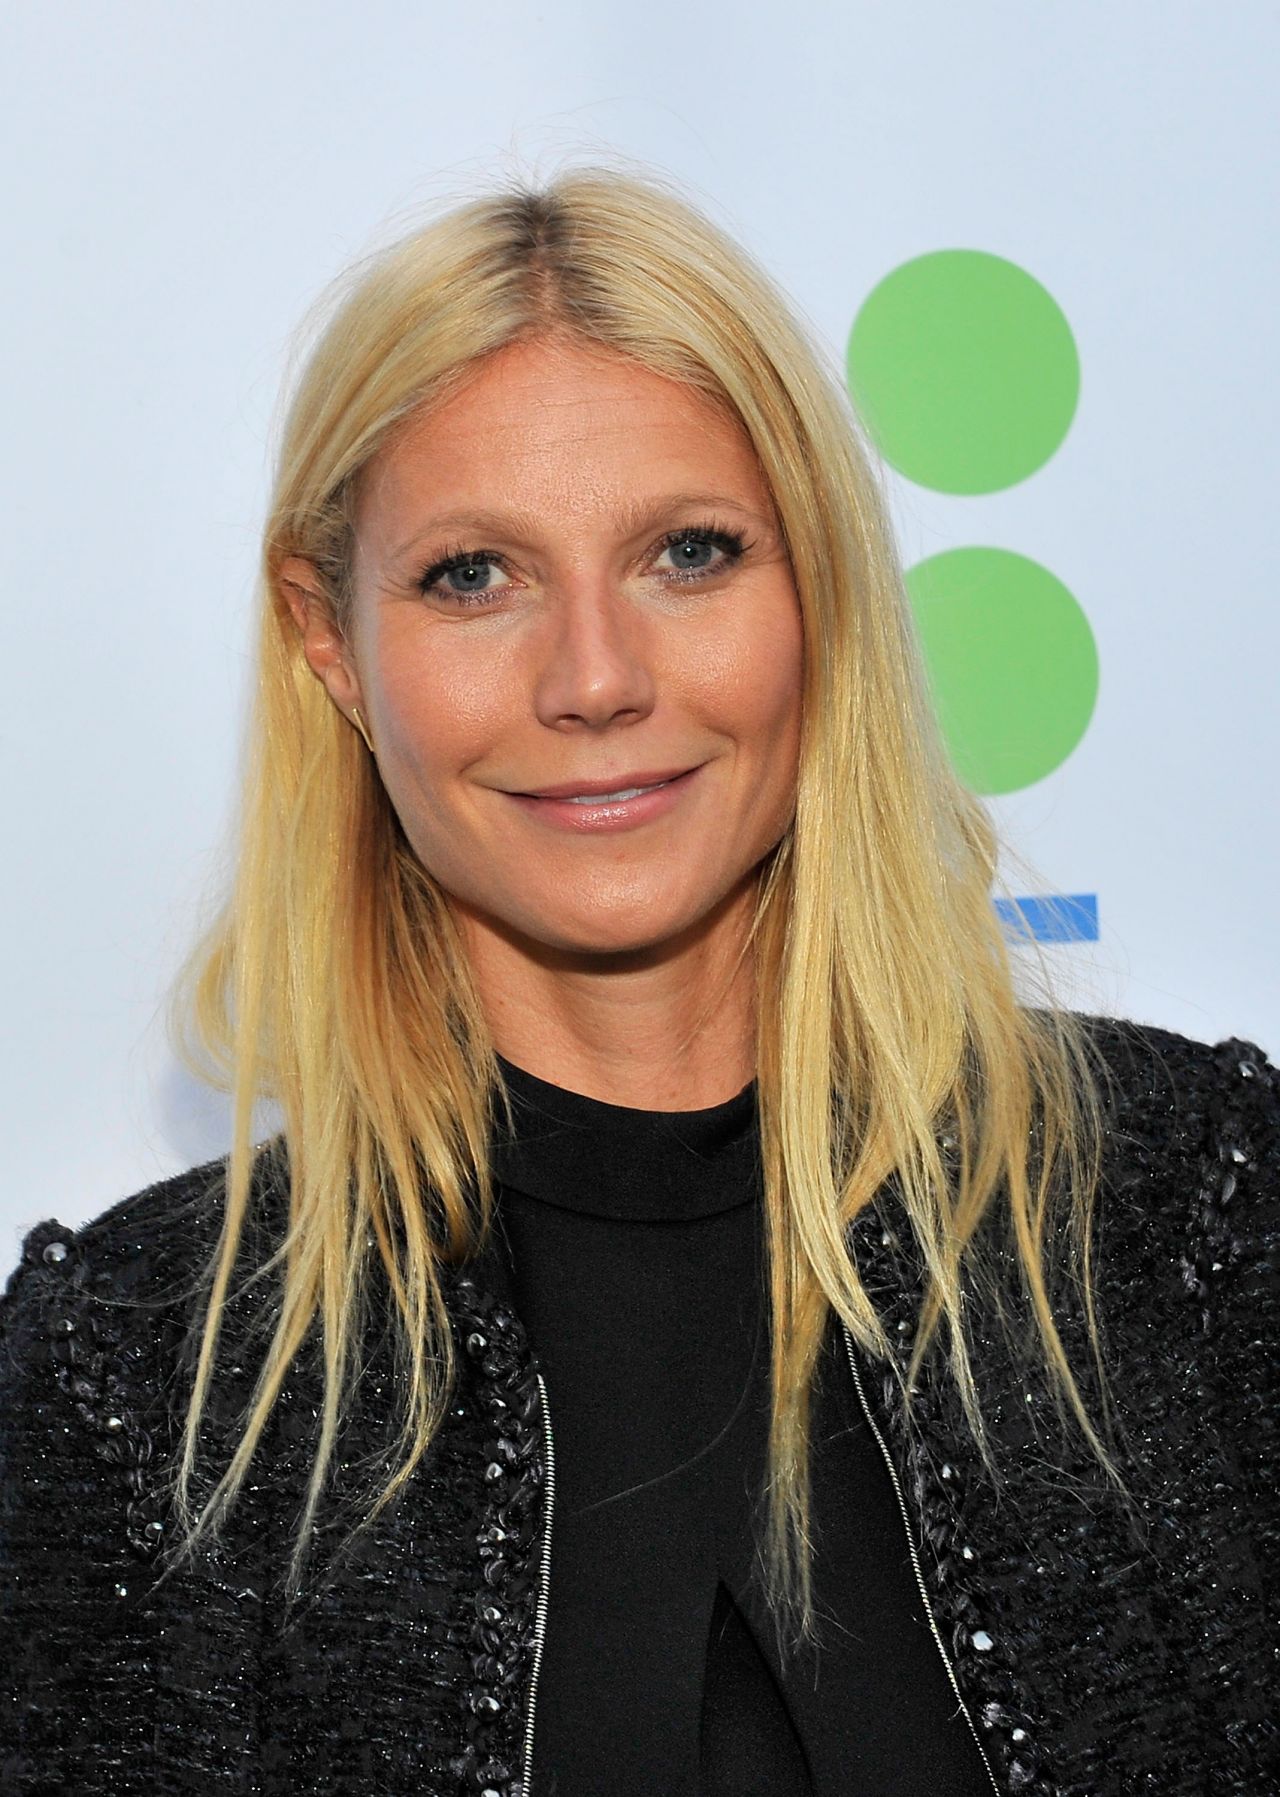 Gwyneth Paltrow Attends The First Annual Coalition For Engaged Education Fundraiser